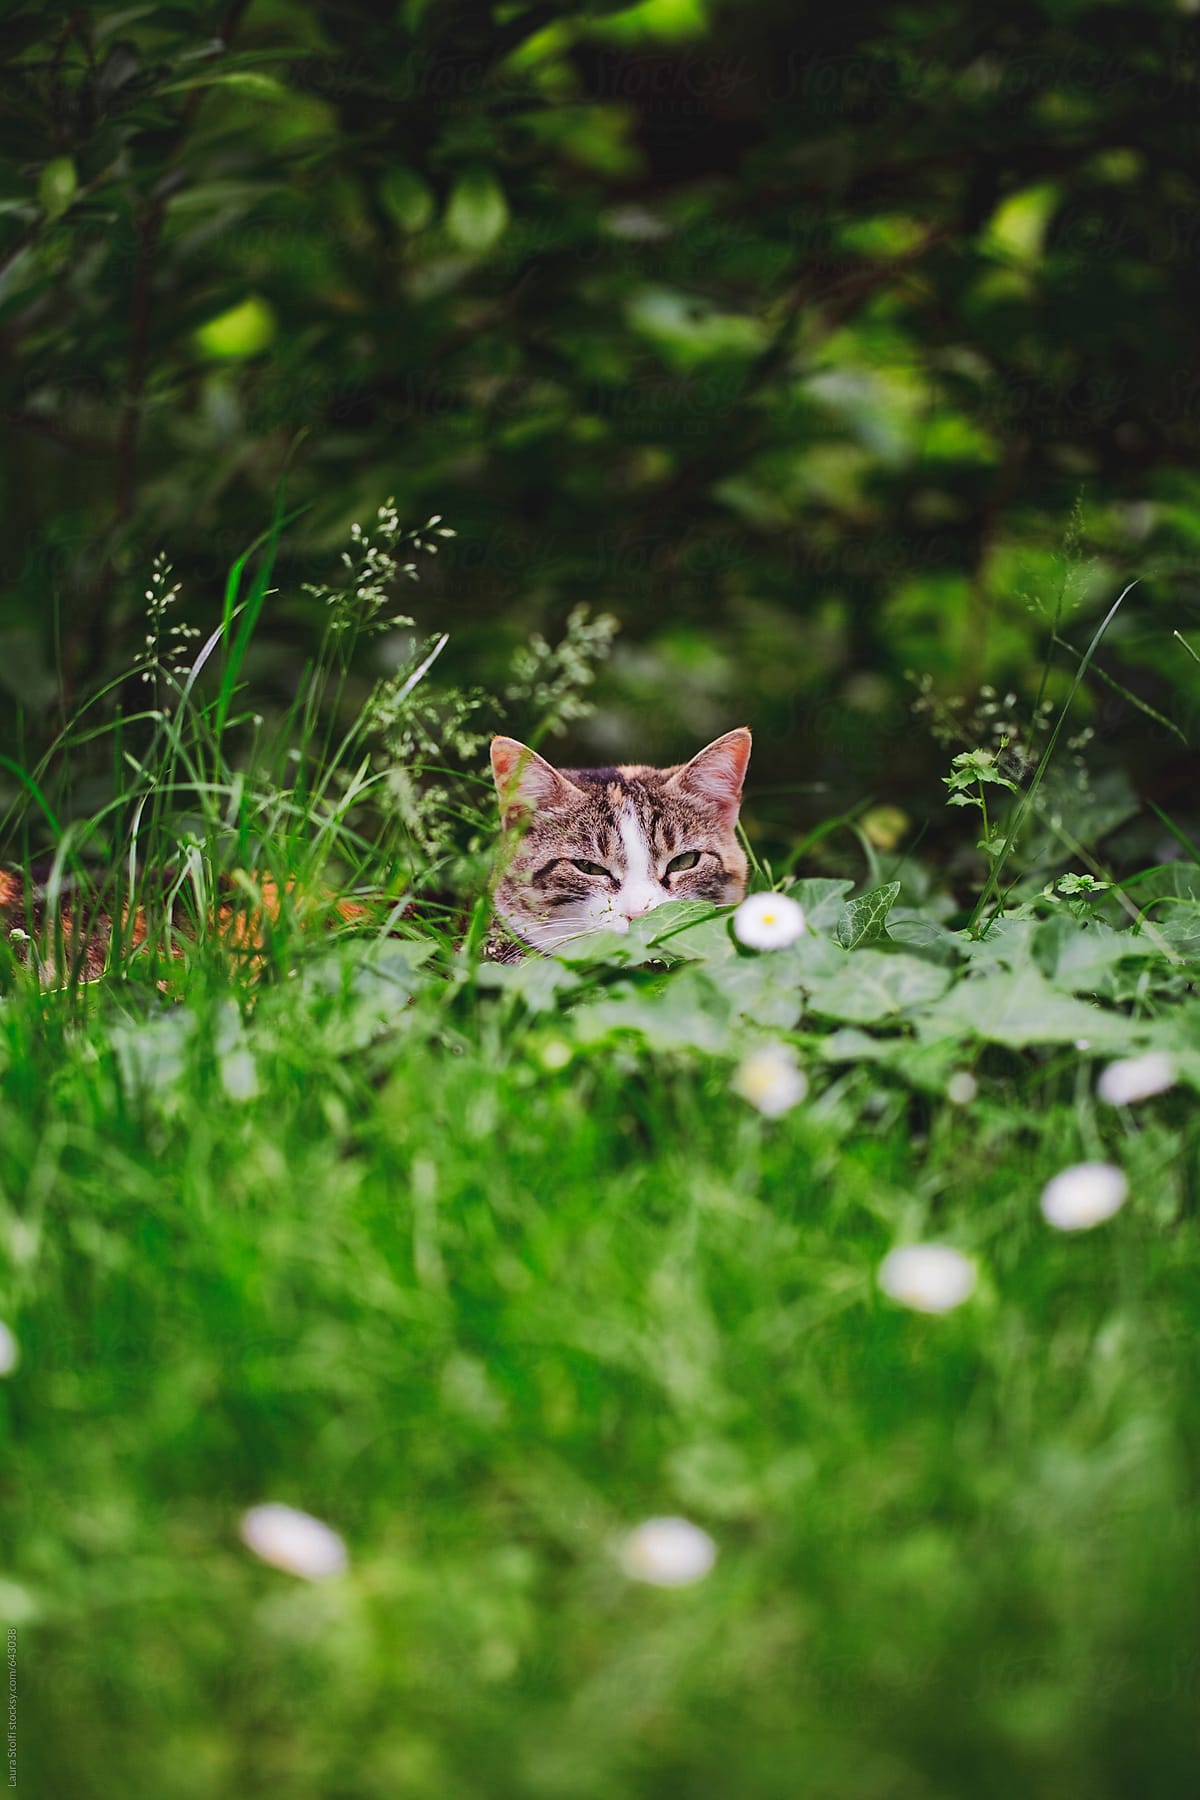 Cat laying in grass and looking at camera with sleepy eye